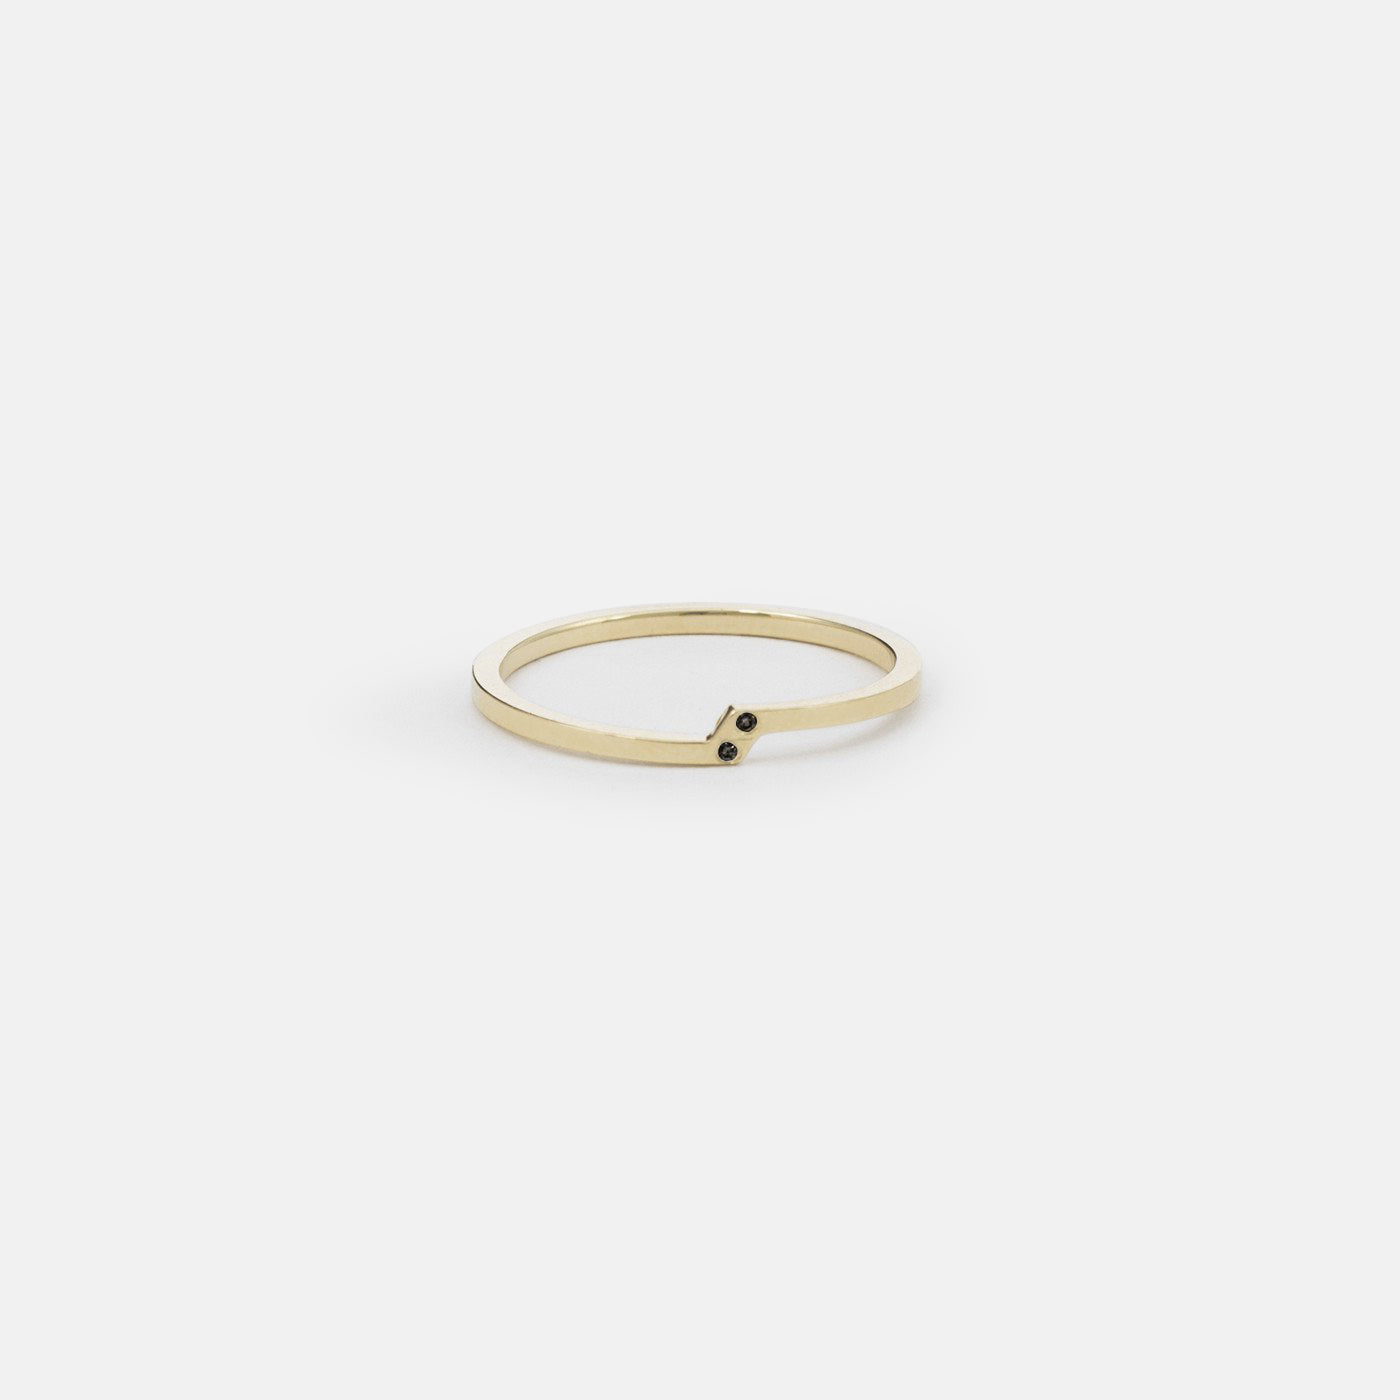 Rili Simple Ring in 14k Gold set with Black Diamonds By SHW Fine Jewelry NYC